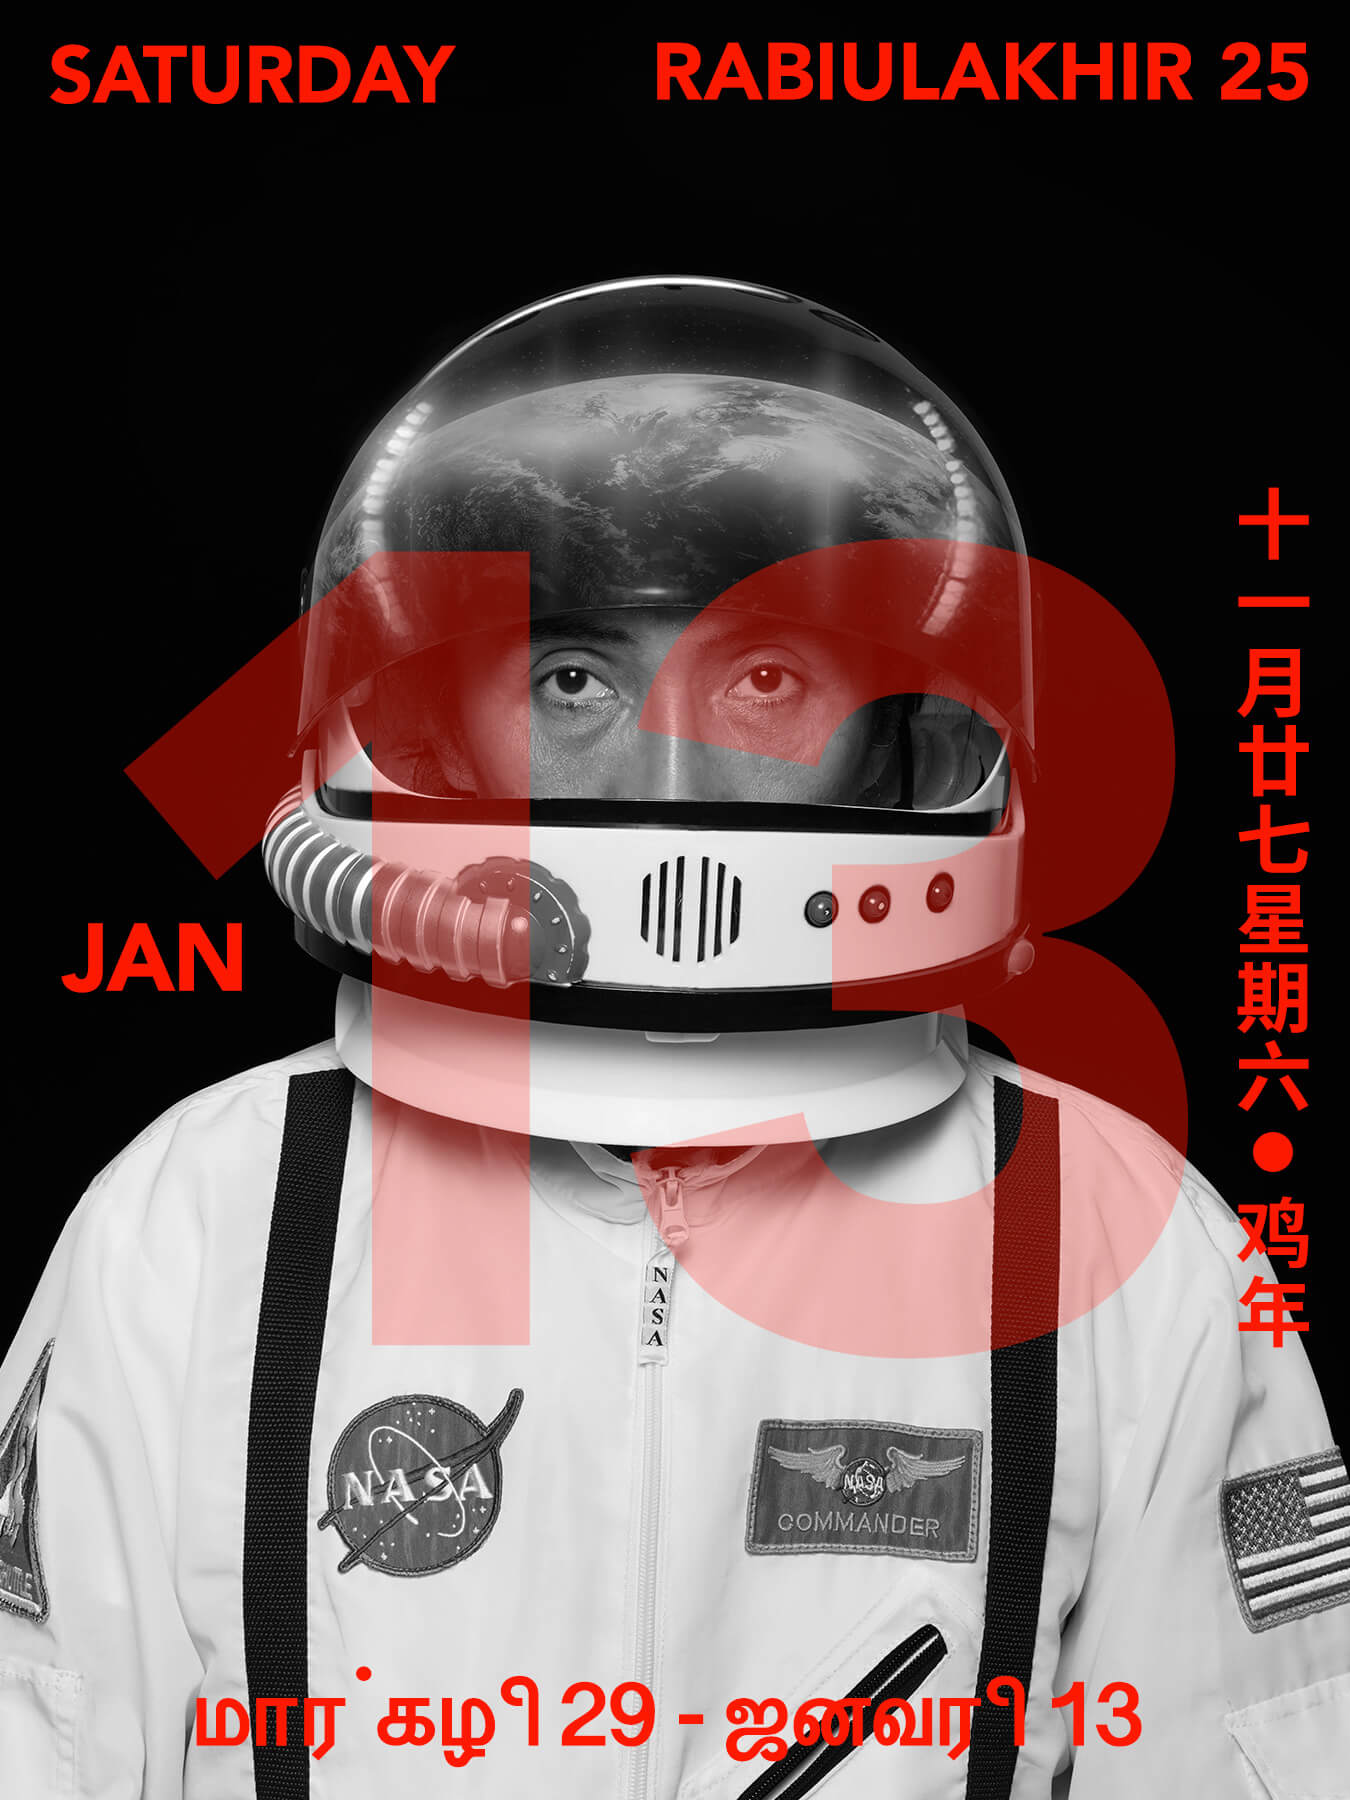 13 Jan 2018 Derong is dressed as an astronaut